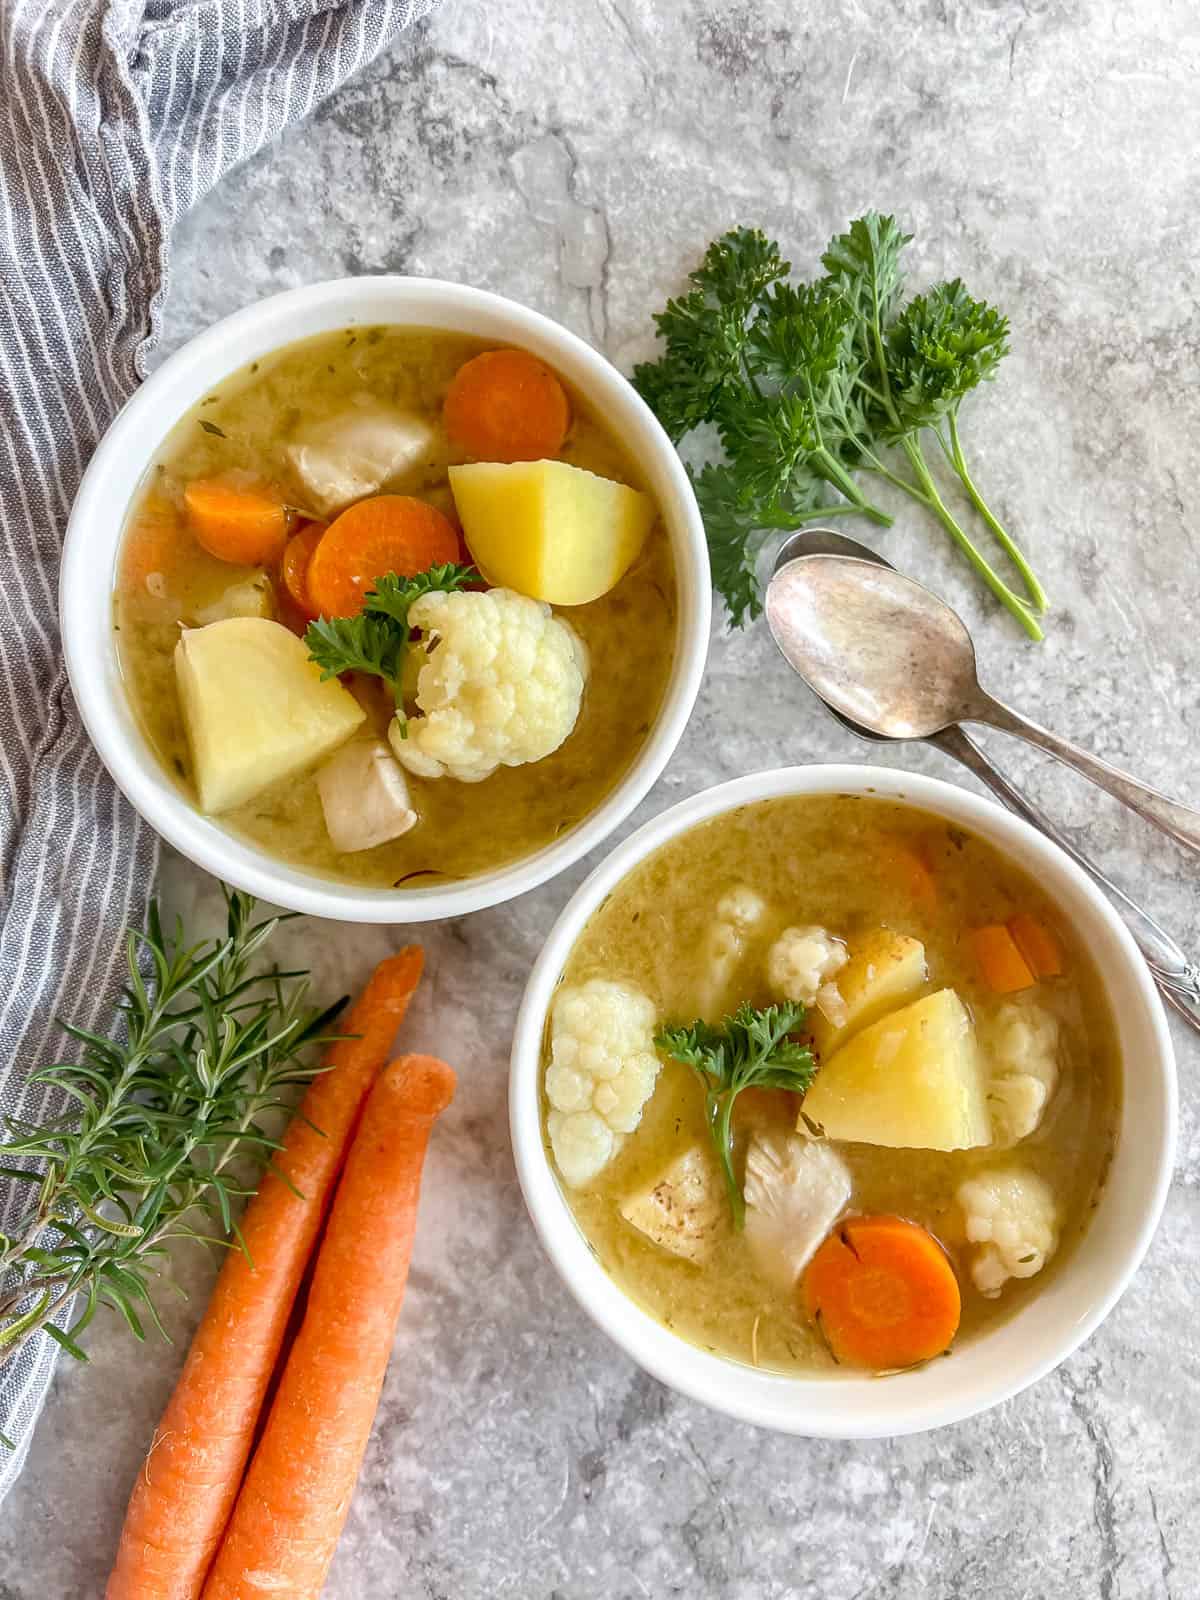 Healthy chicken soup made without noodles in two bowls.